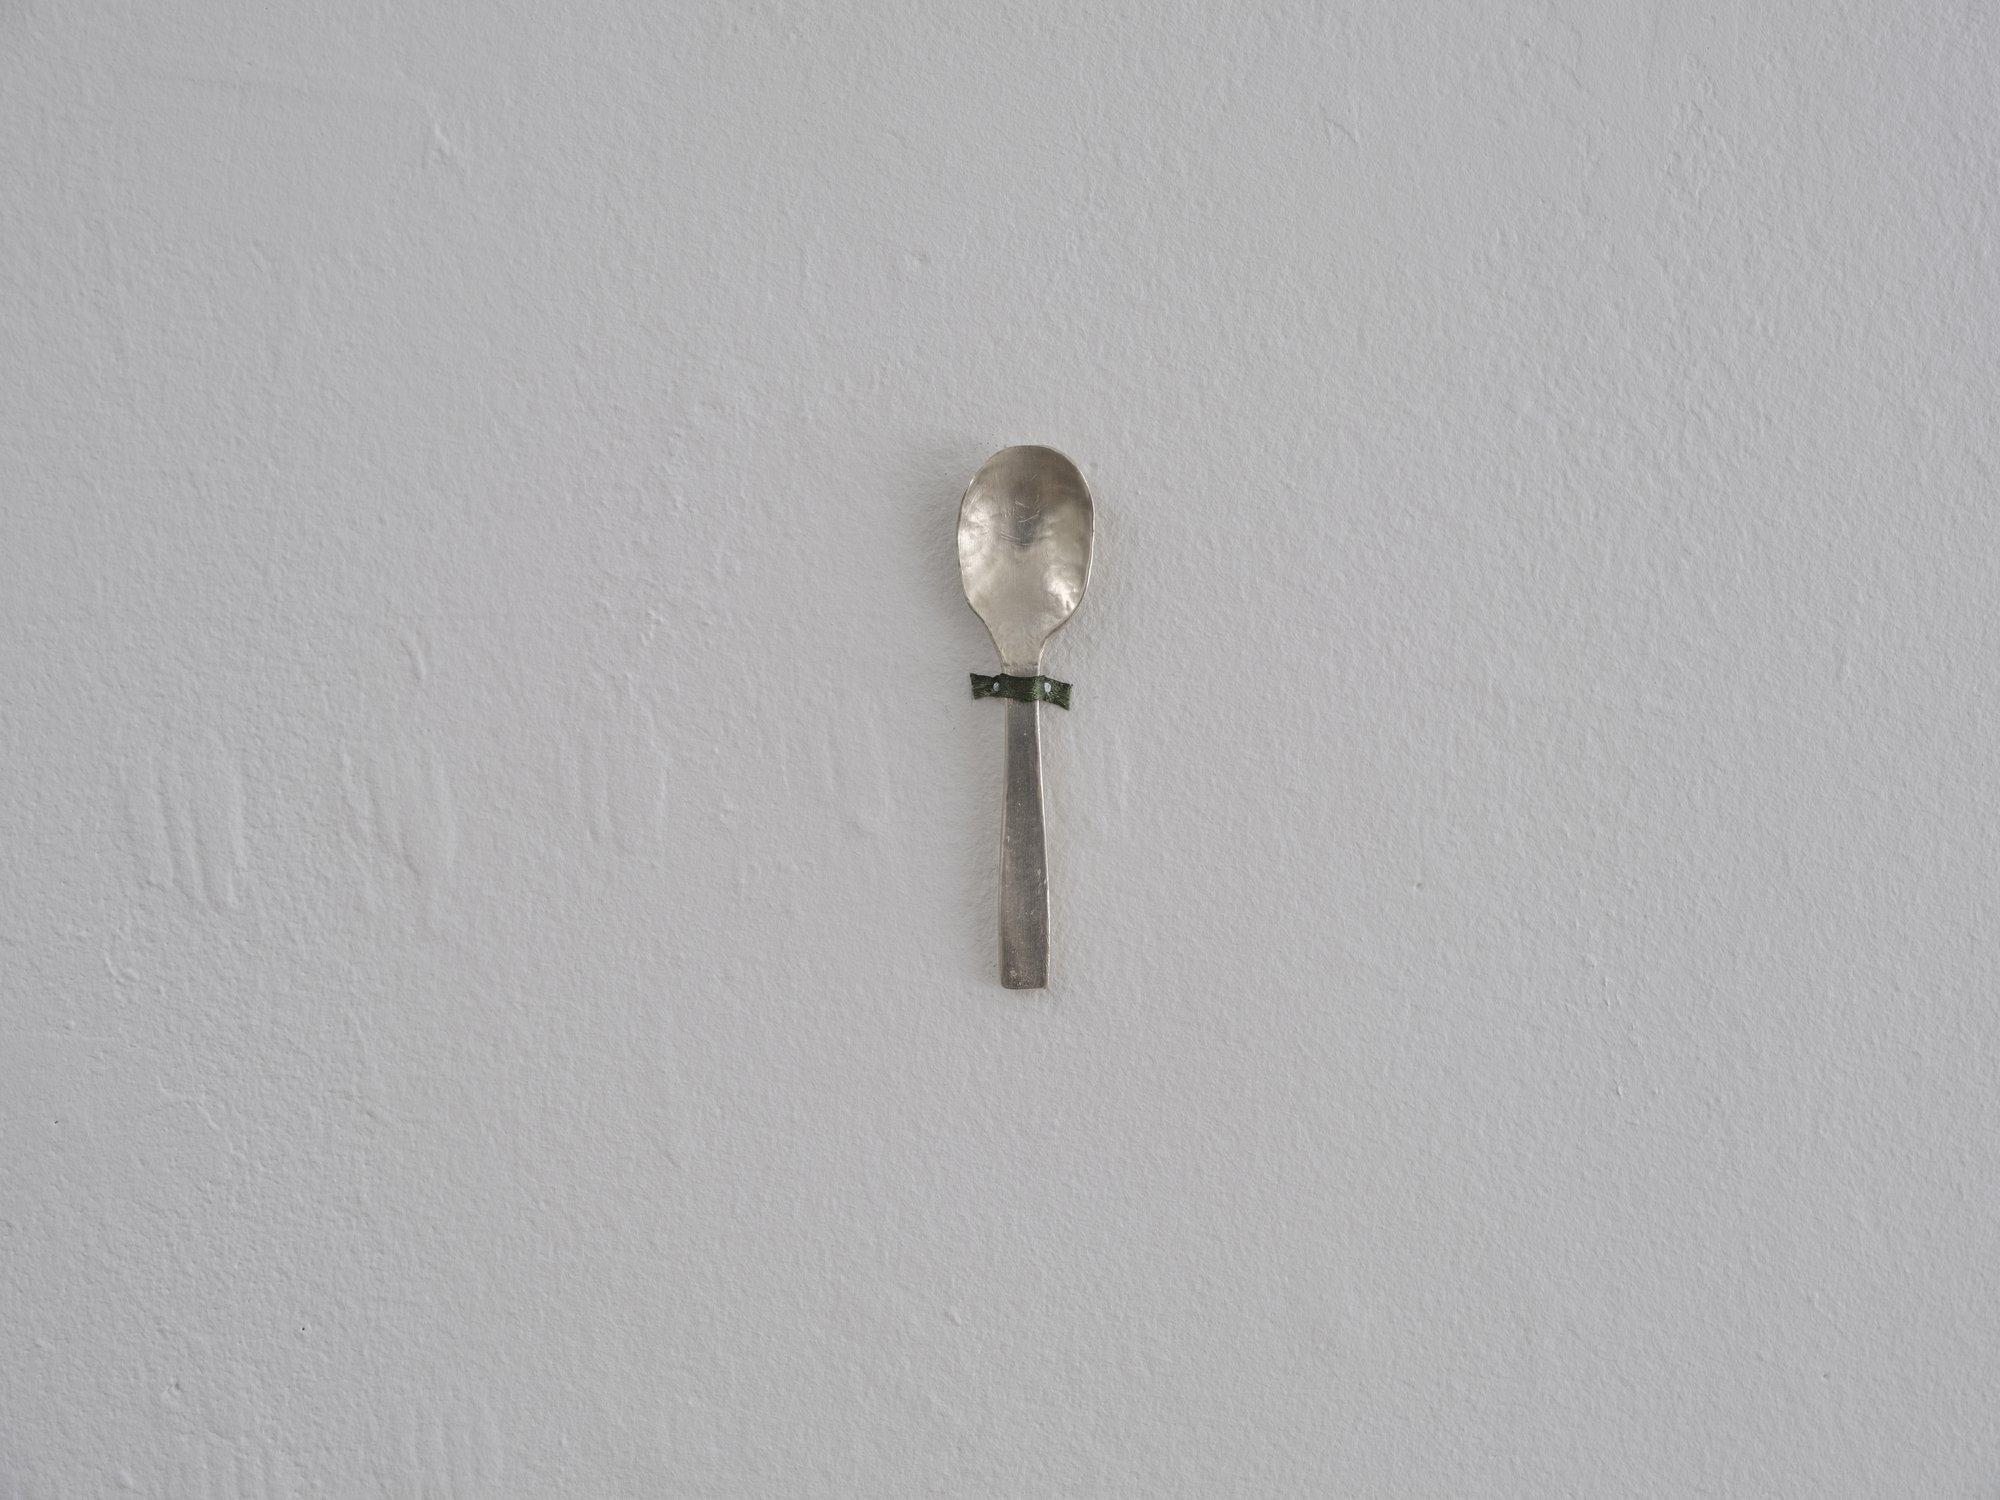 Installation view, Sidsel Meineche Hansen, silver spoon, Four Boxes Gallery, Skive, 2024